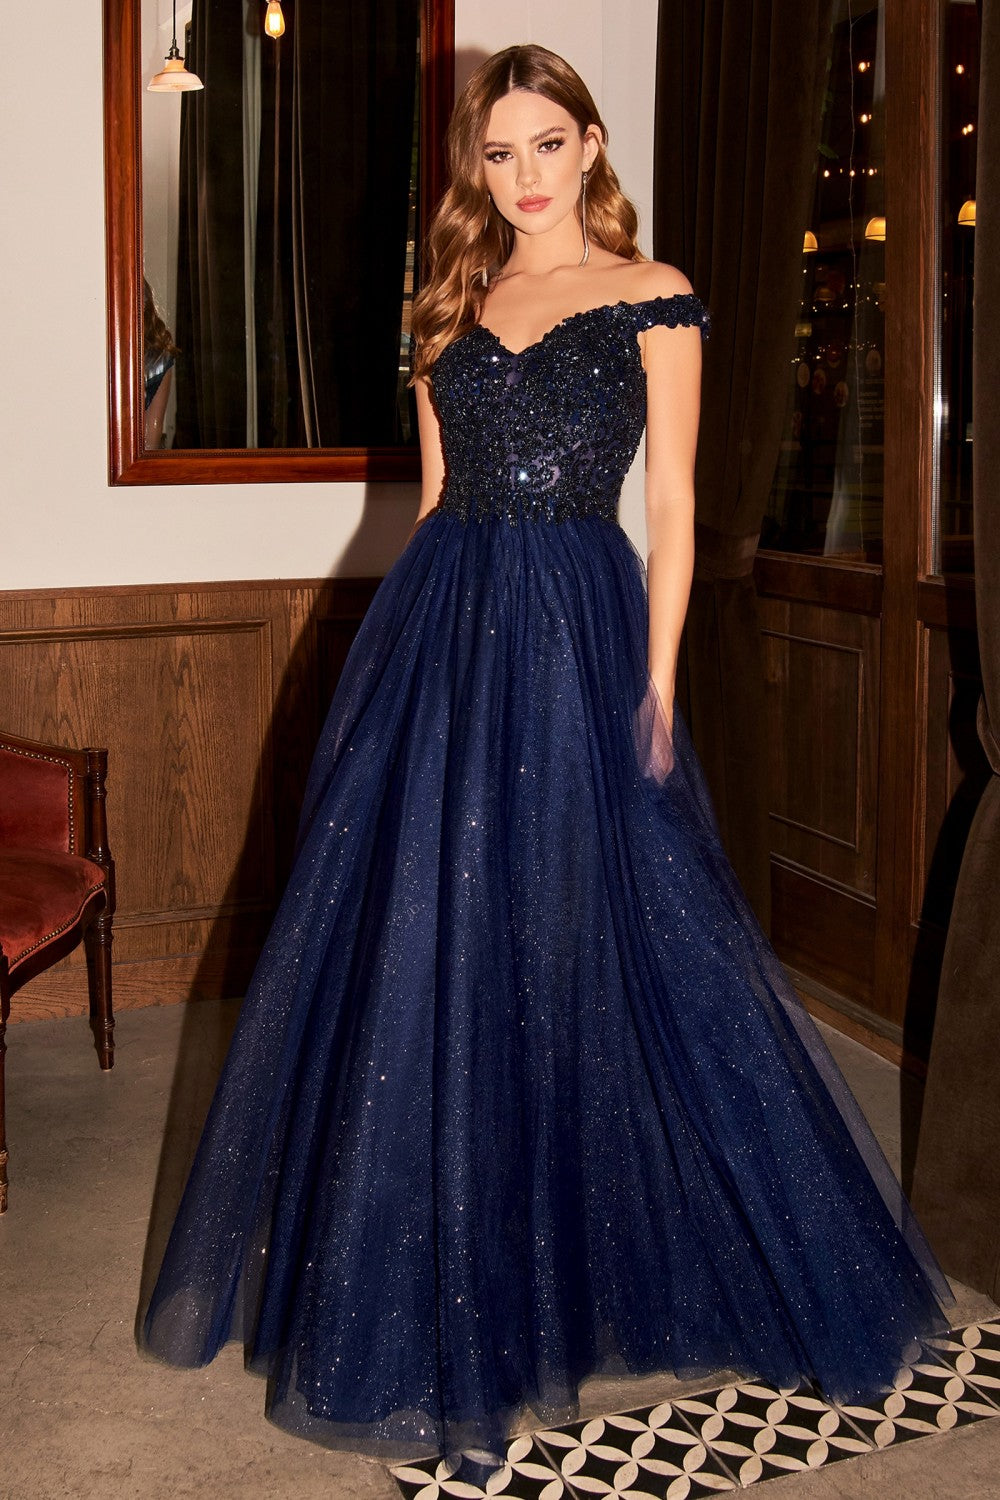 Ophelia Prom Dress Off the Shoulder Ball Gown C177AX-Navy